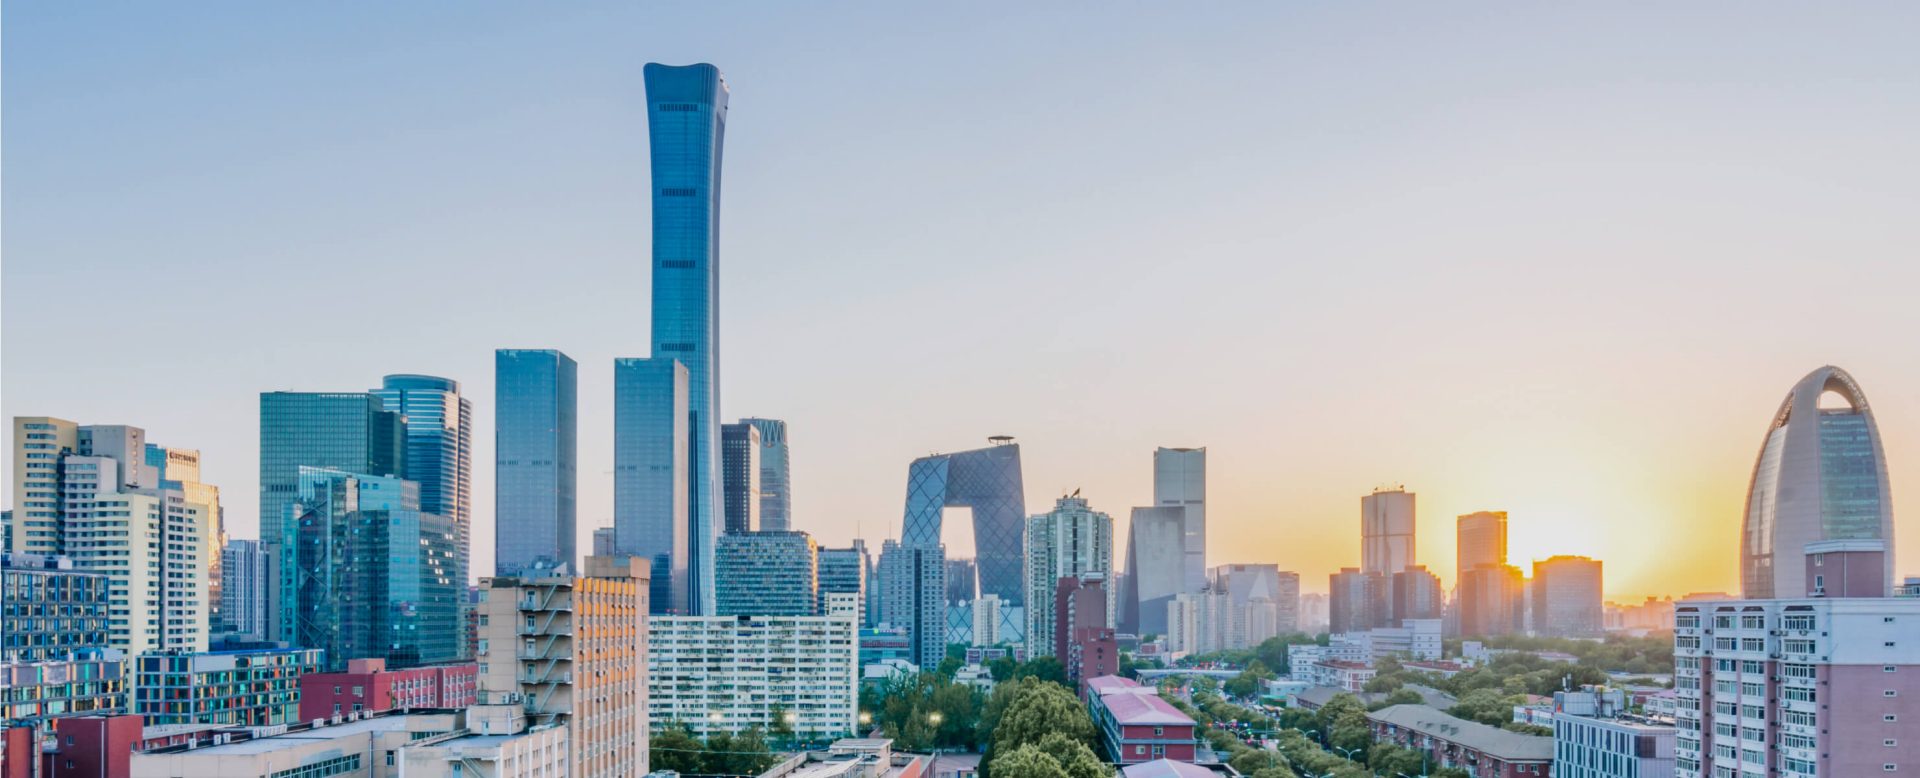 Dawn at the CBD – the Central Business District of Beijing, where the DZ BANK representative office for China is located